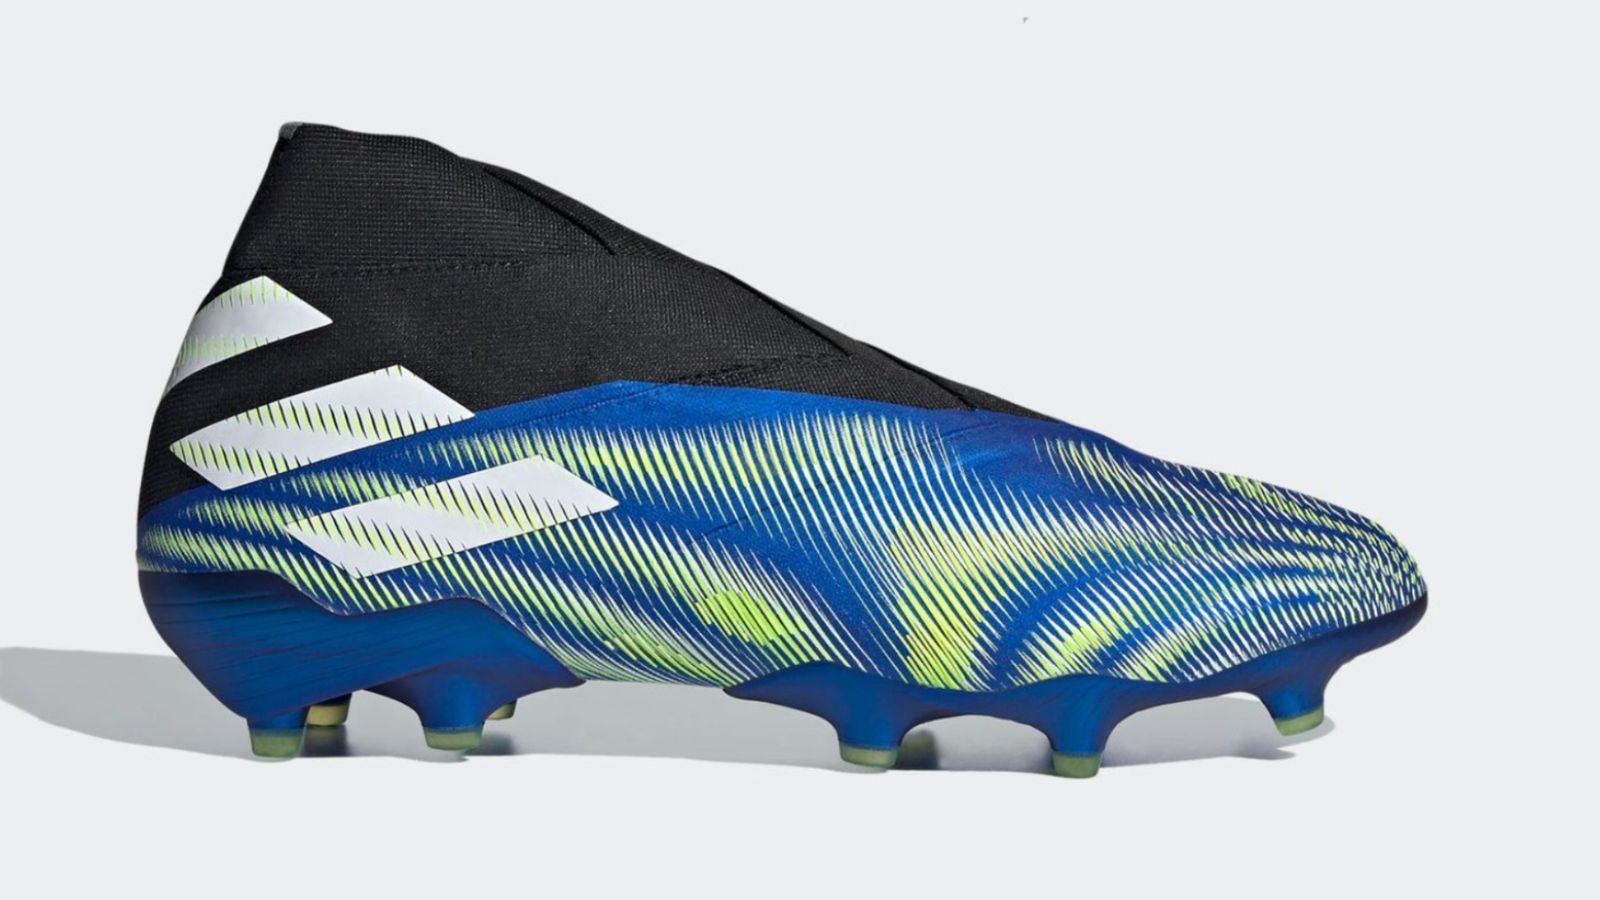 adidas Nemeziz 20+ product image of a laceless football boot with a blue and light yellow patterned upper with a black collar.